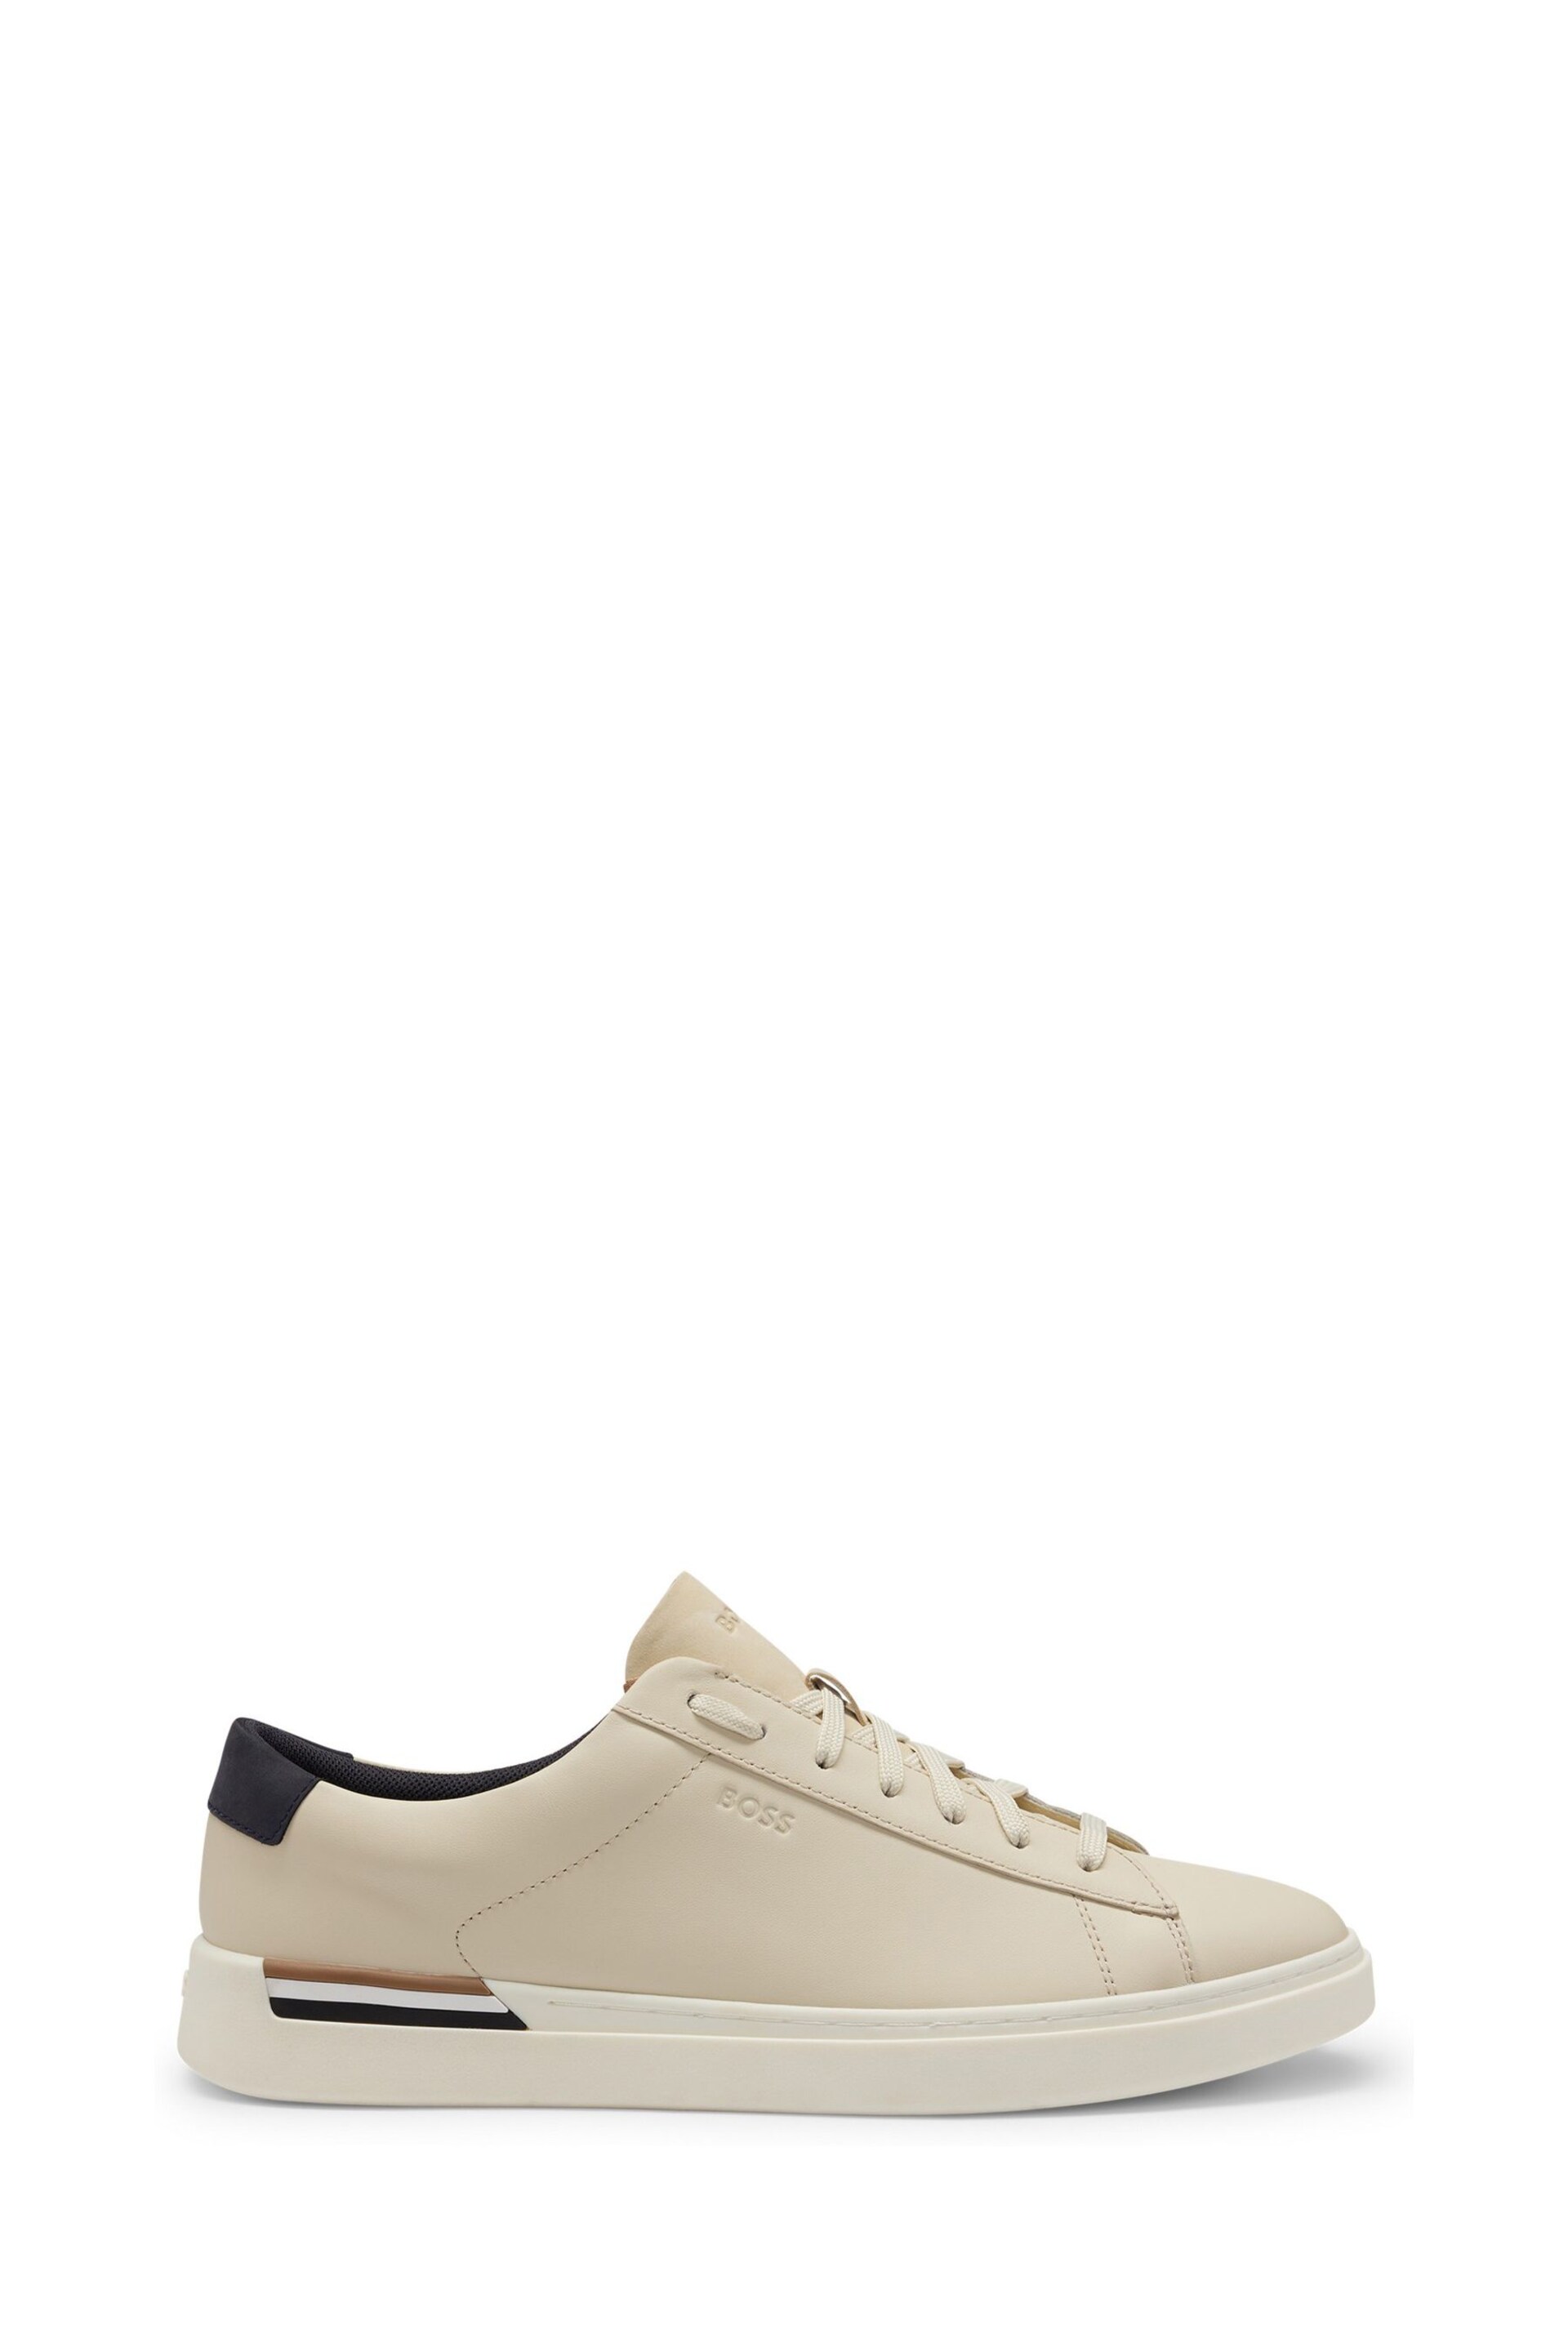 BOSS Cream Clint Cupsole Lace Up Leather Trainers - Image 1 of 5